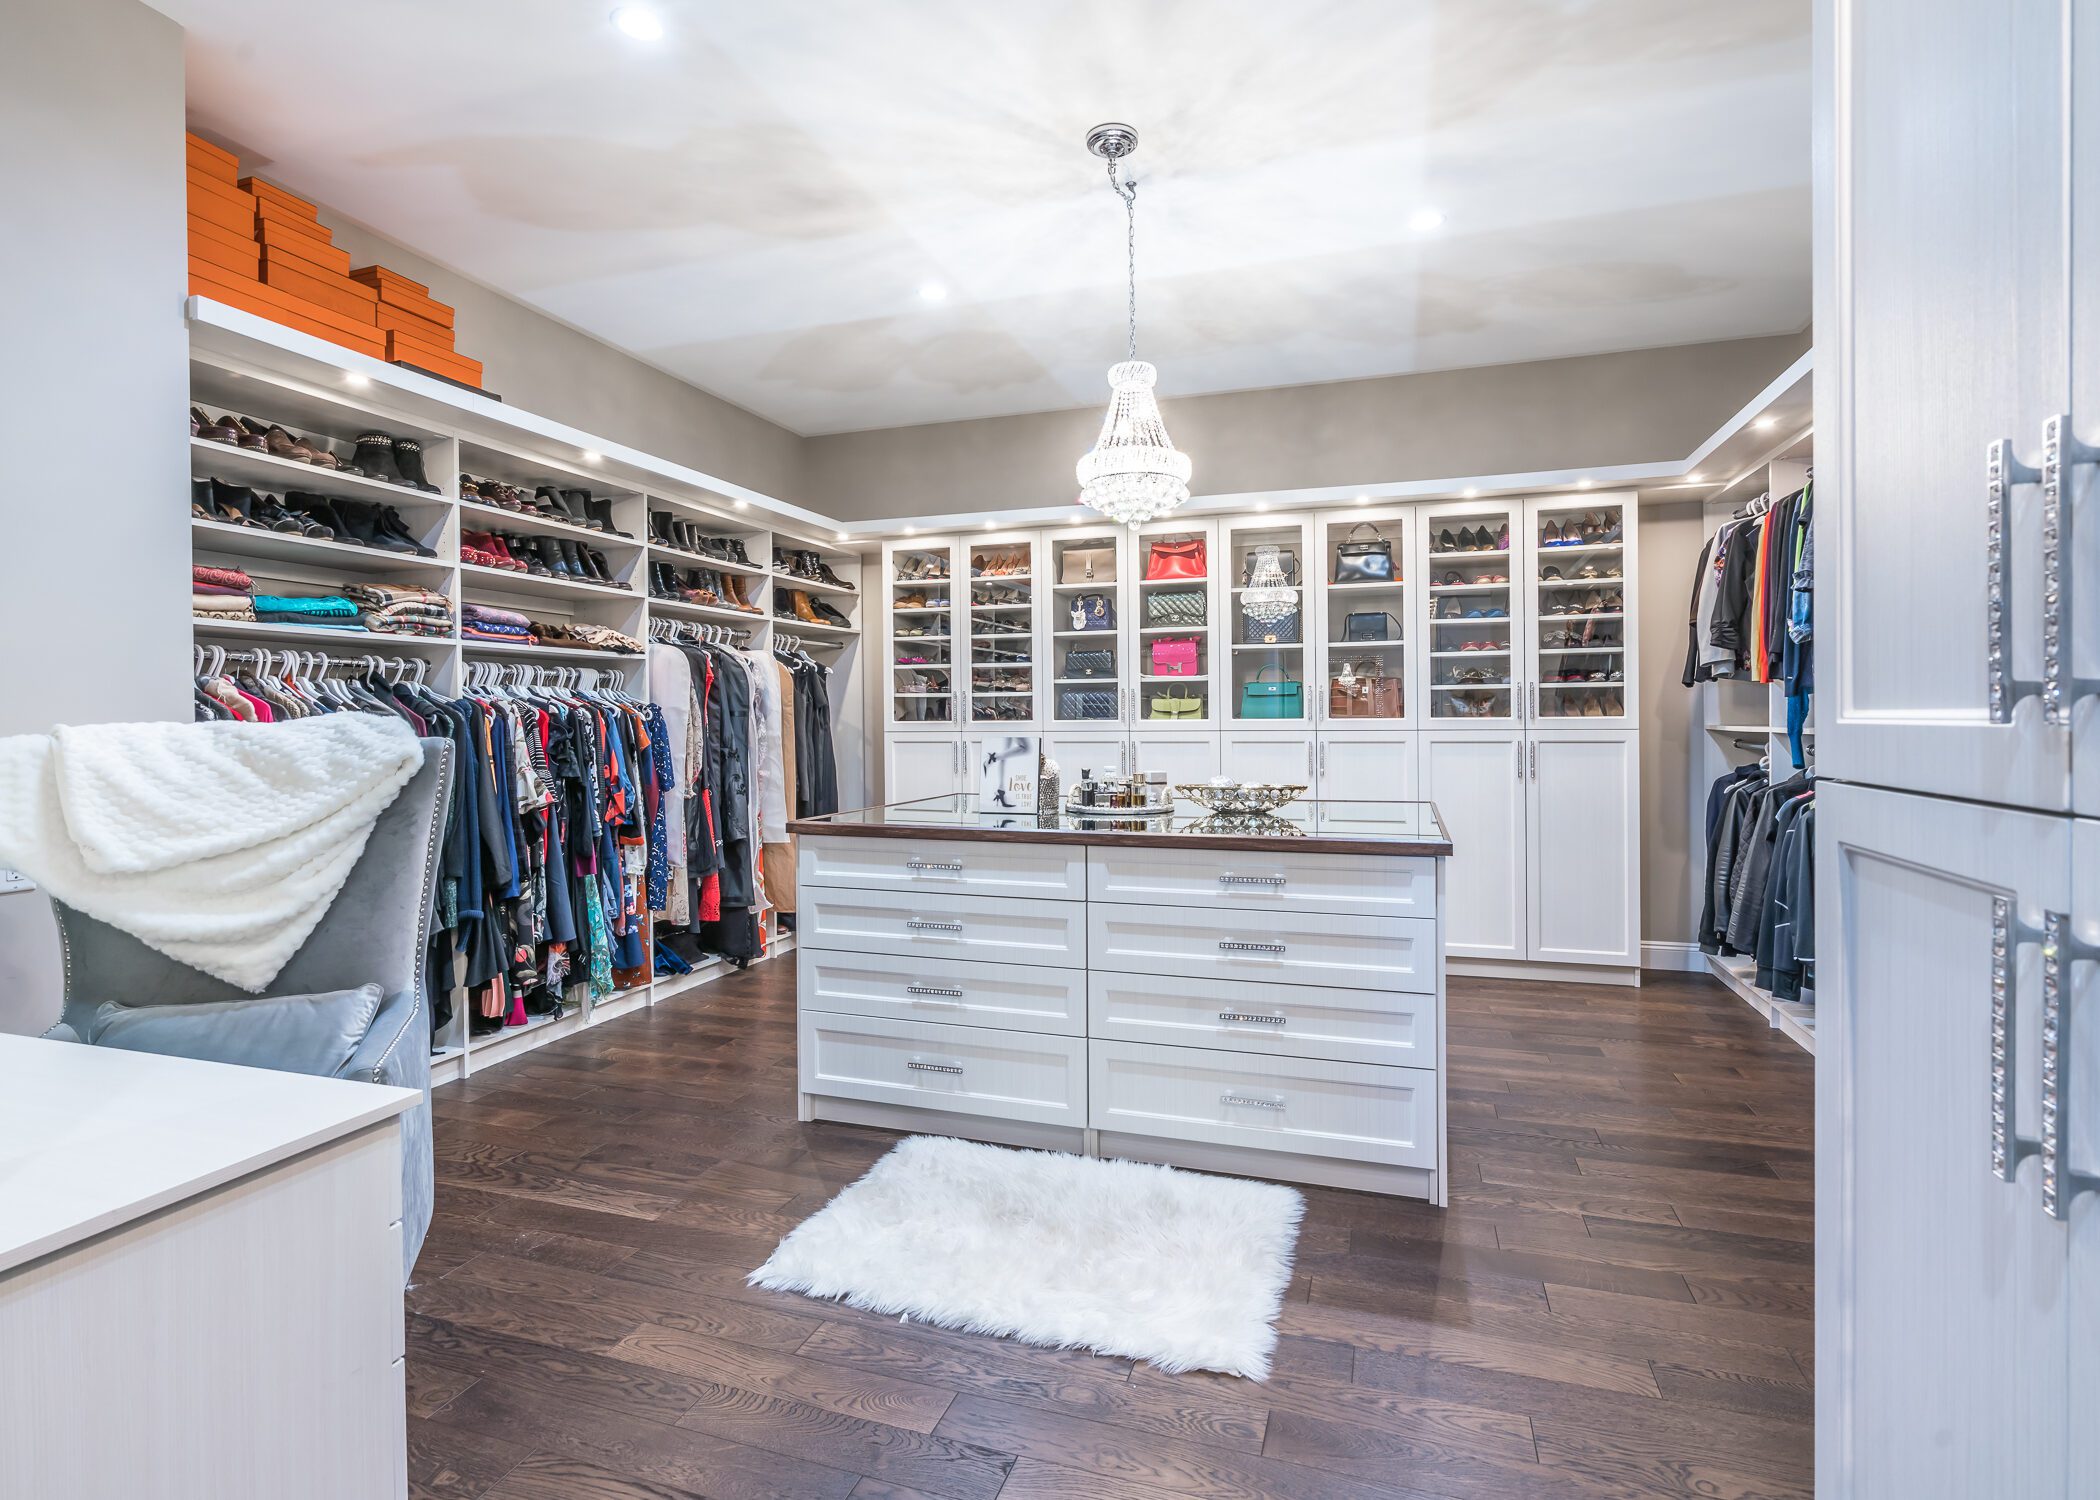 Spacious, luxurious walk-in closet with an island in the center